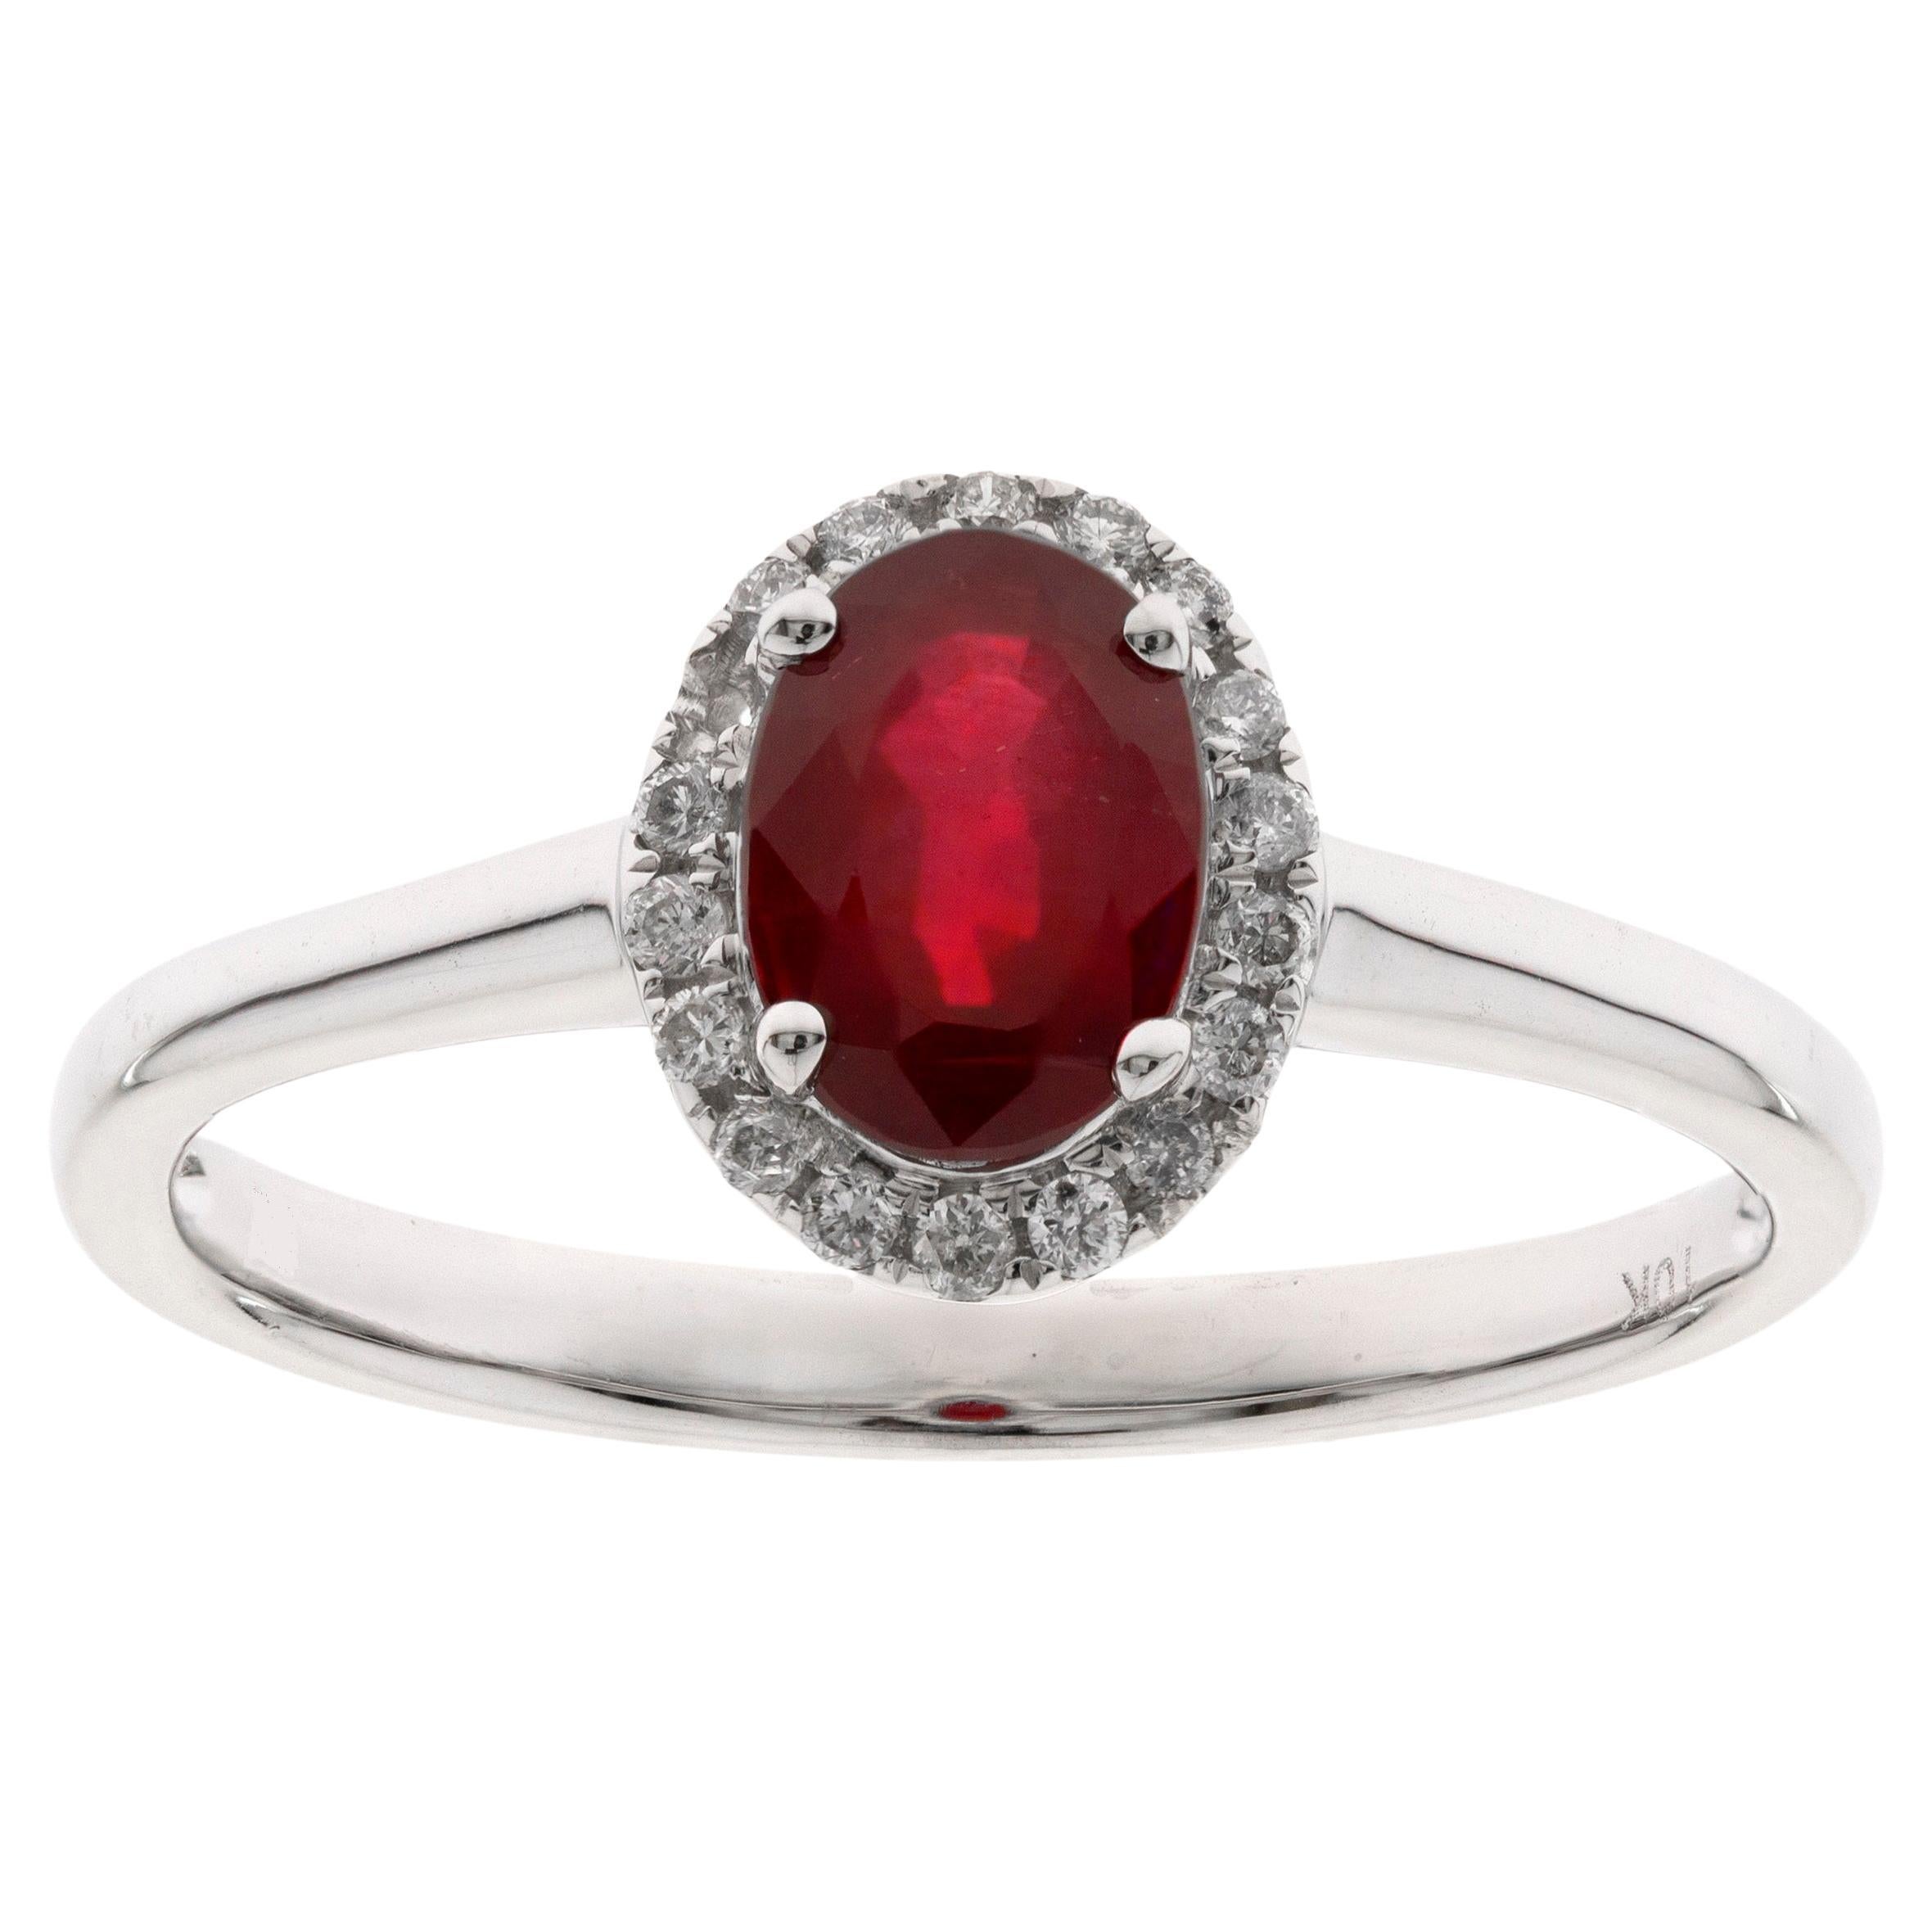 0.84 Carat Oval-Cut Ruby with Diamond Accents 10K White Gold Ring